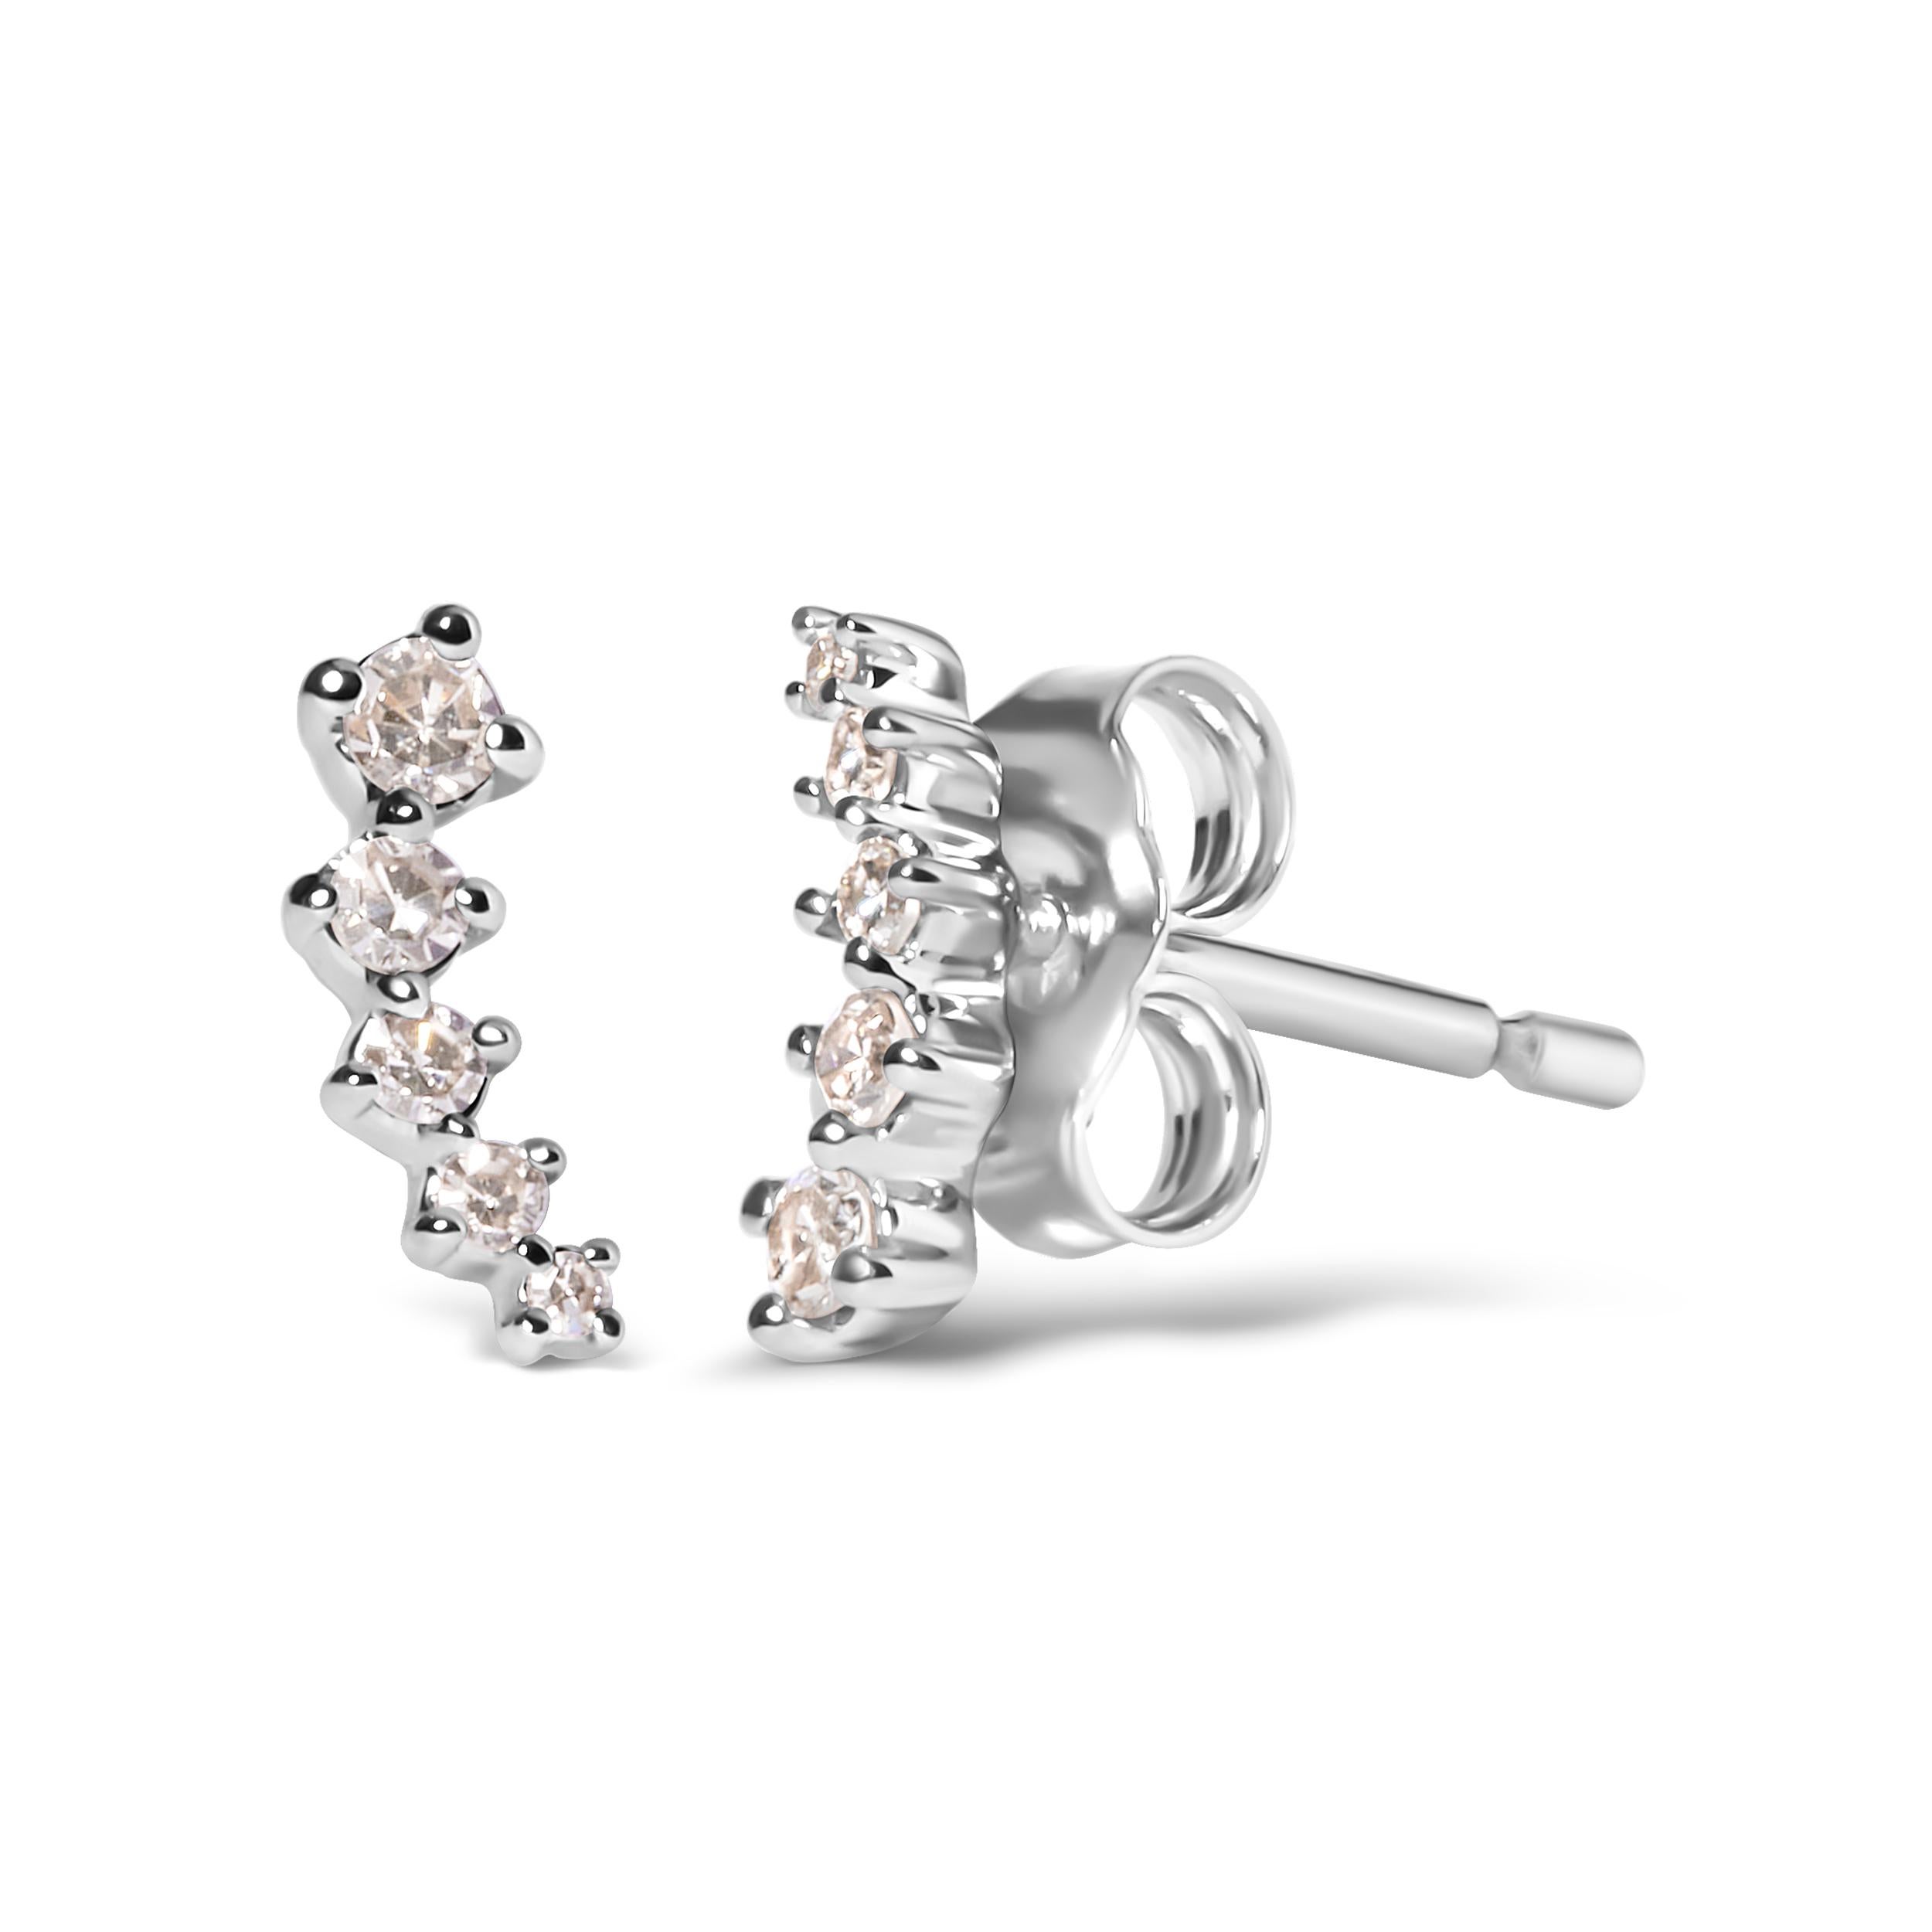 Introducing our exquisite 10K White Gold Climber Stud Earrings, a dazzling journey of elegance and style. Crafted with precision in mind, these earrings feature a total of 10 natural round diamonds, totaling 1/10 cttw. The diamonds, boasting a